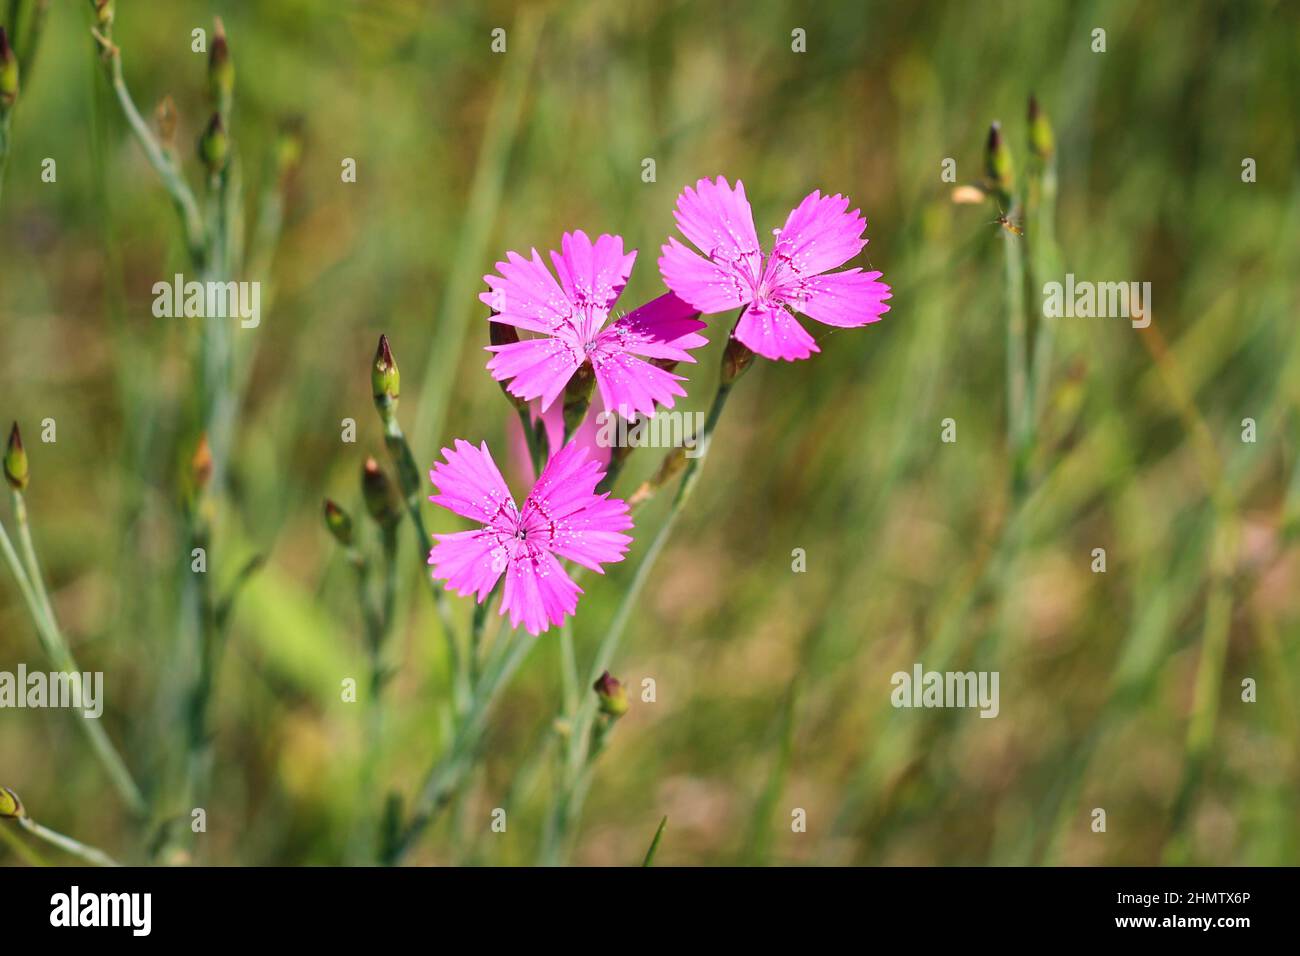 Dianthus borbasii vandas, dianthus deltoides blooming in the meadow. Stock Photo